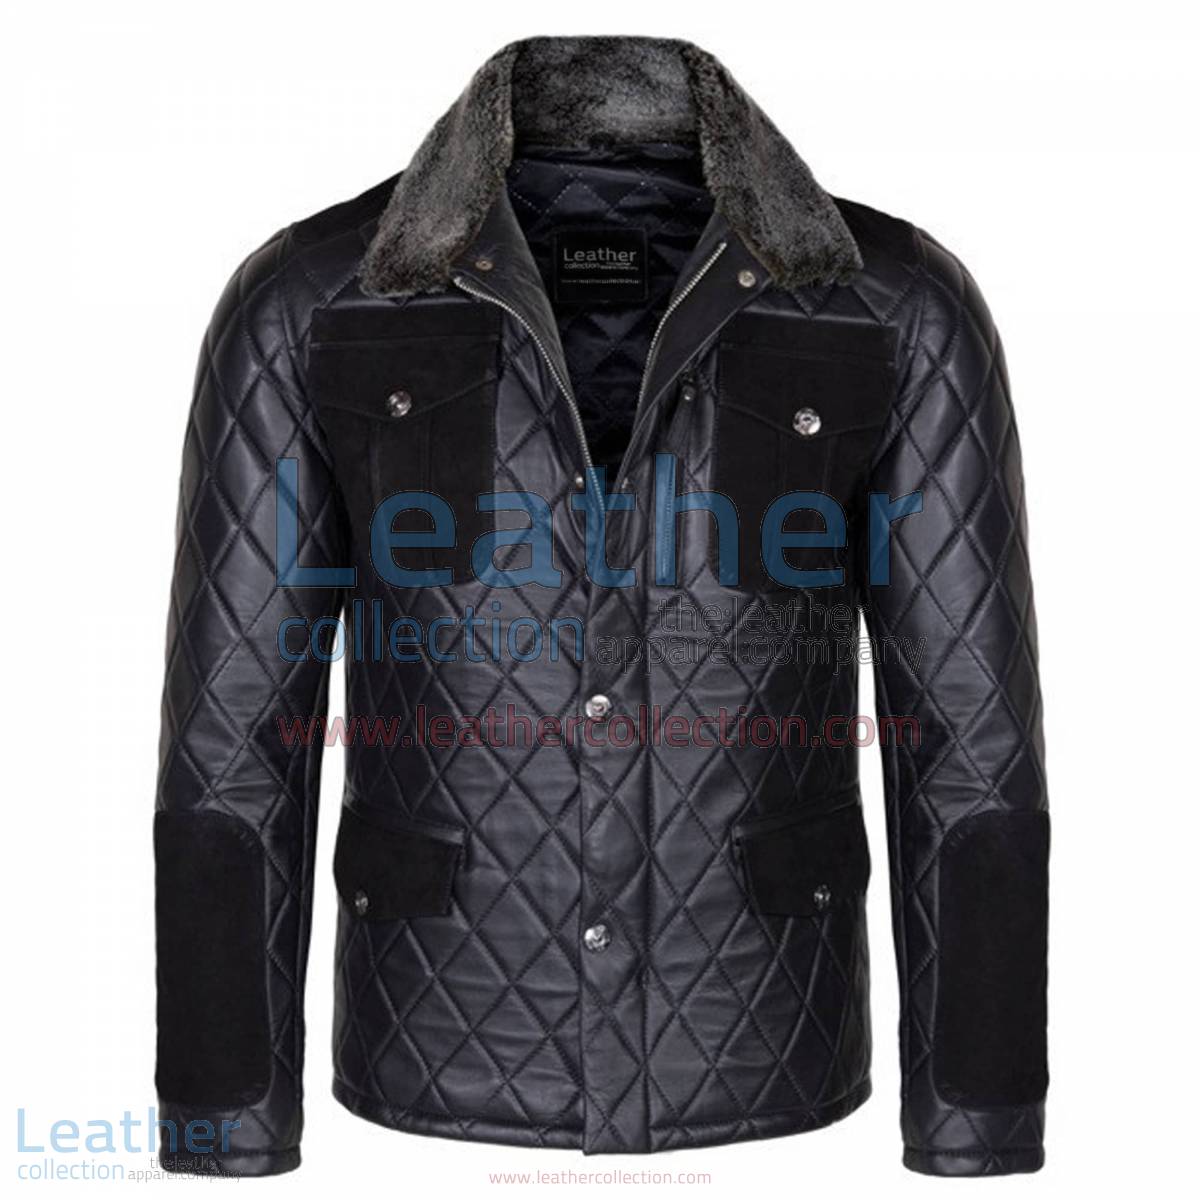 Diamond Leather Jacket with Fur Collar & Flapped Pockets | diamond jacket,jacket with fur collar